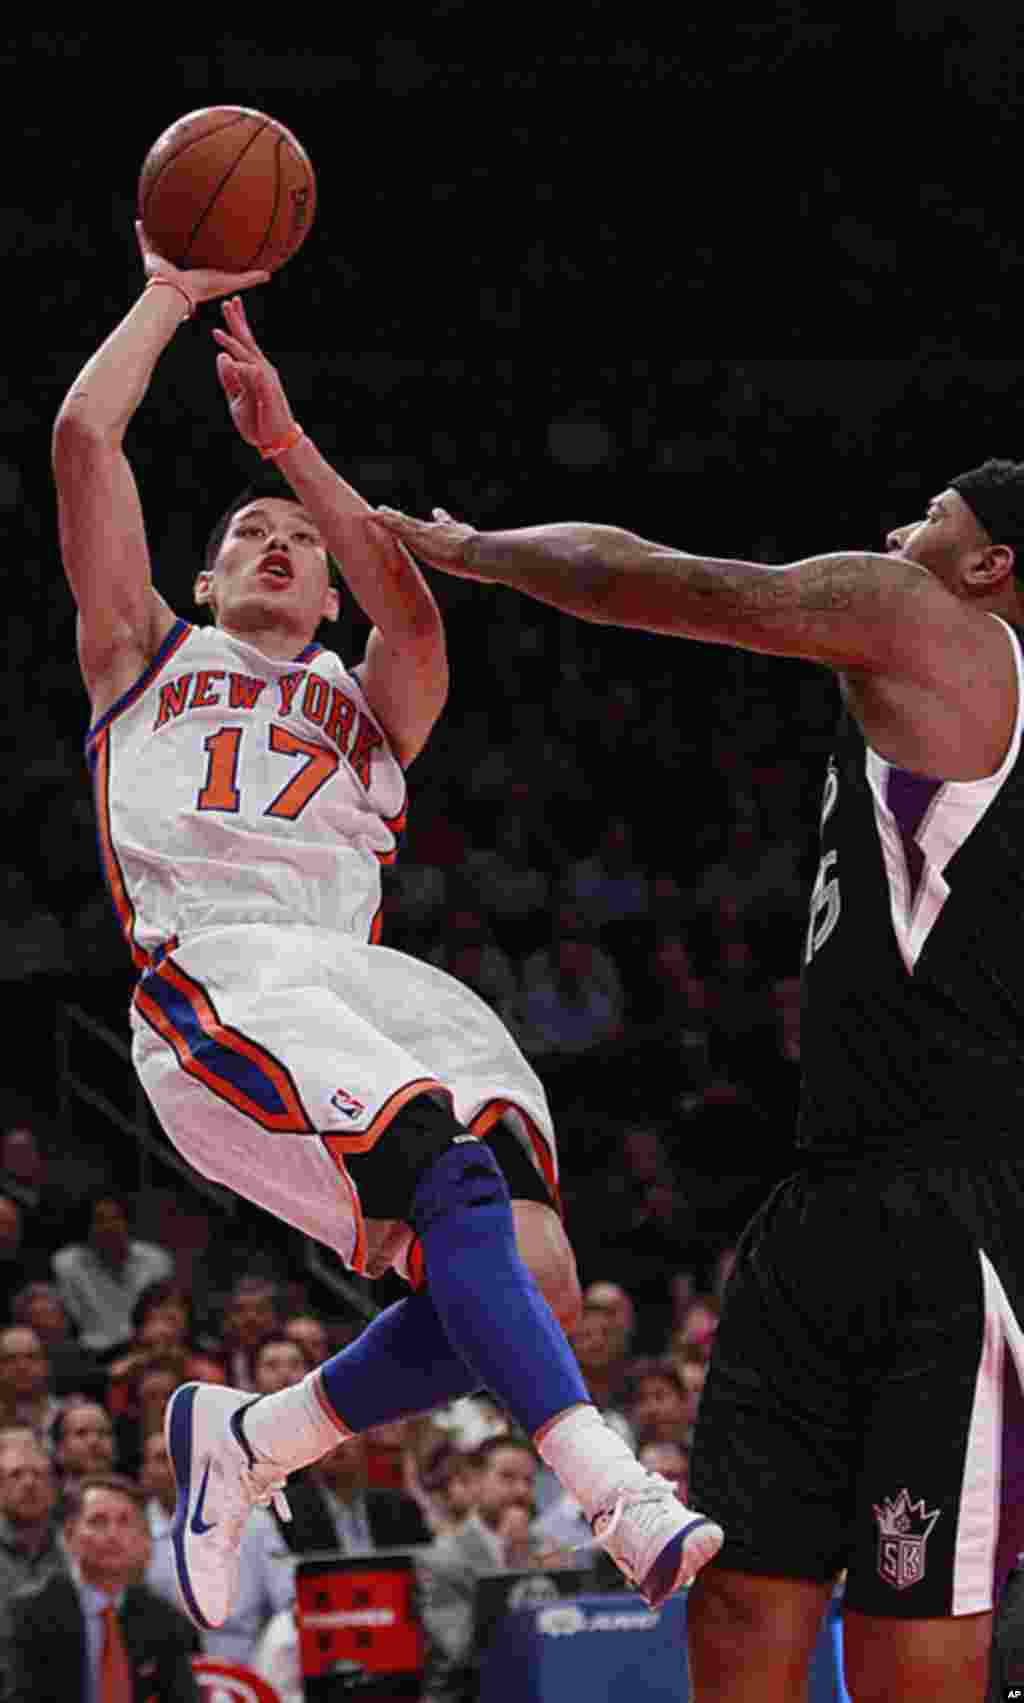 New York Knicks' Jeremy Lin shoots over Sacramento Kings' DeMarcus Cousins during an NBA basketball game February 15, 2012, in New York. (AP)